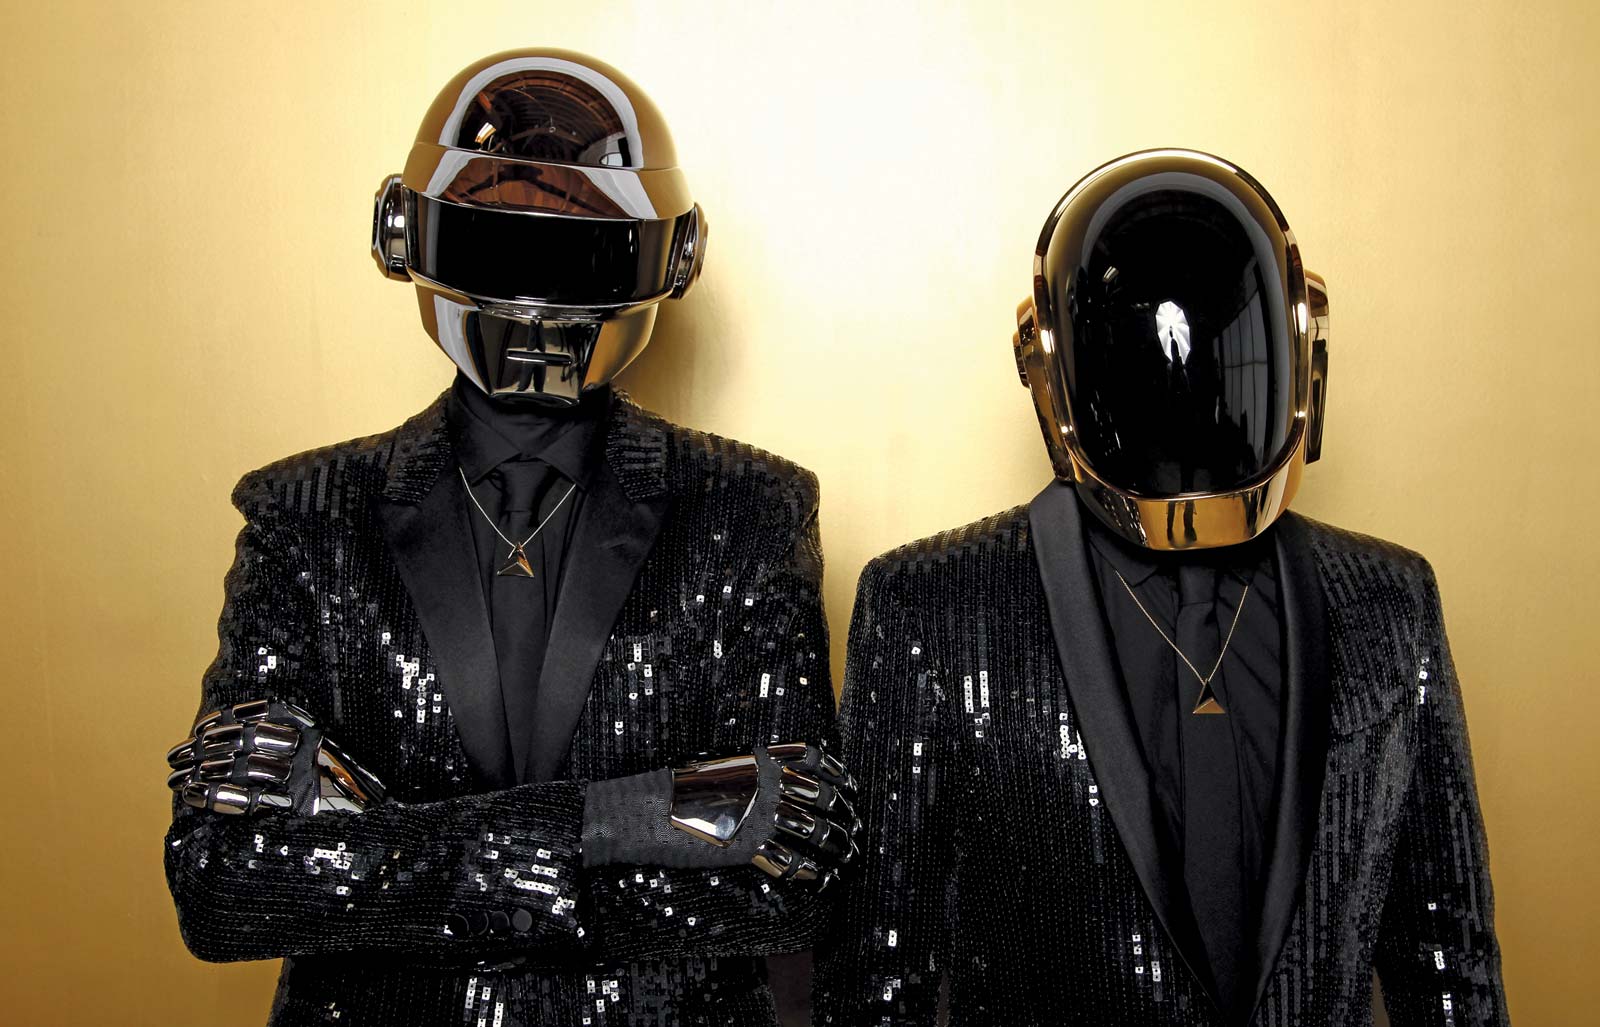 Daft Punk confirm they’ve split up after 28 years with dramatic Epilogue explosion video